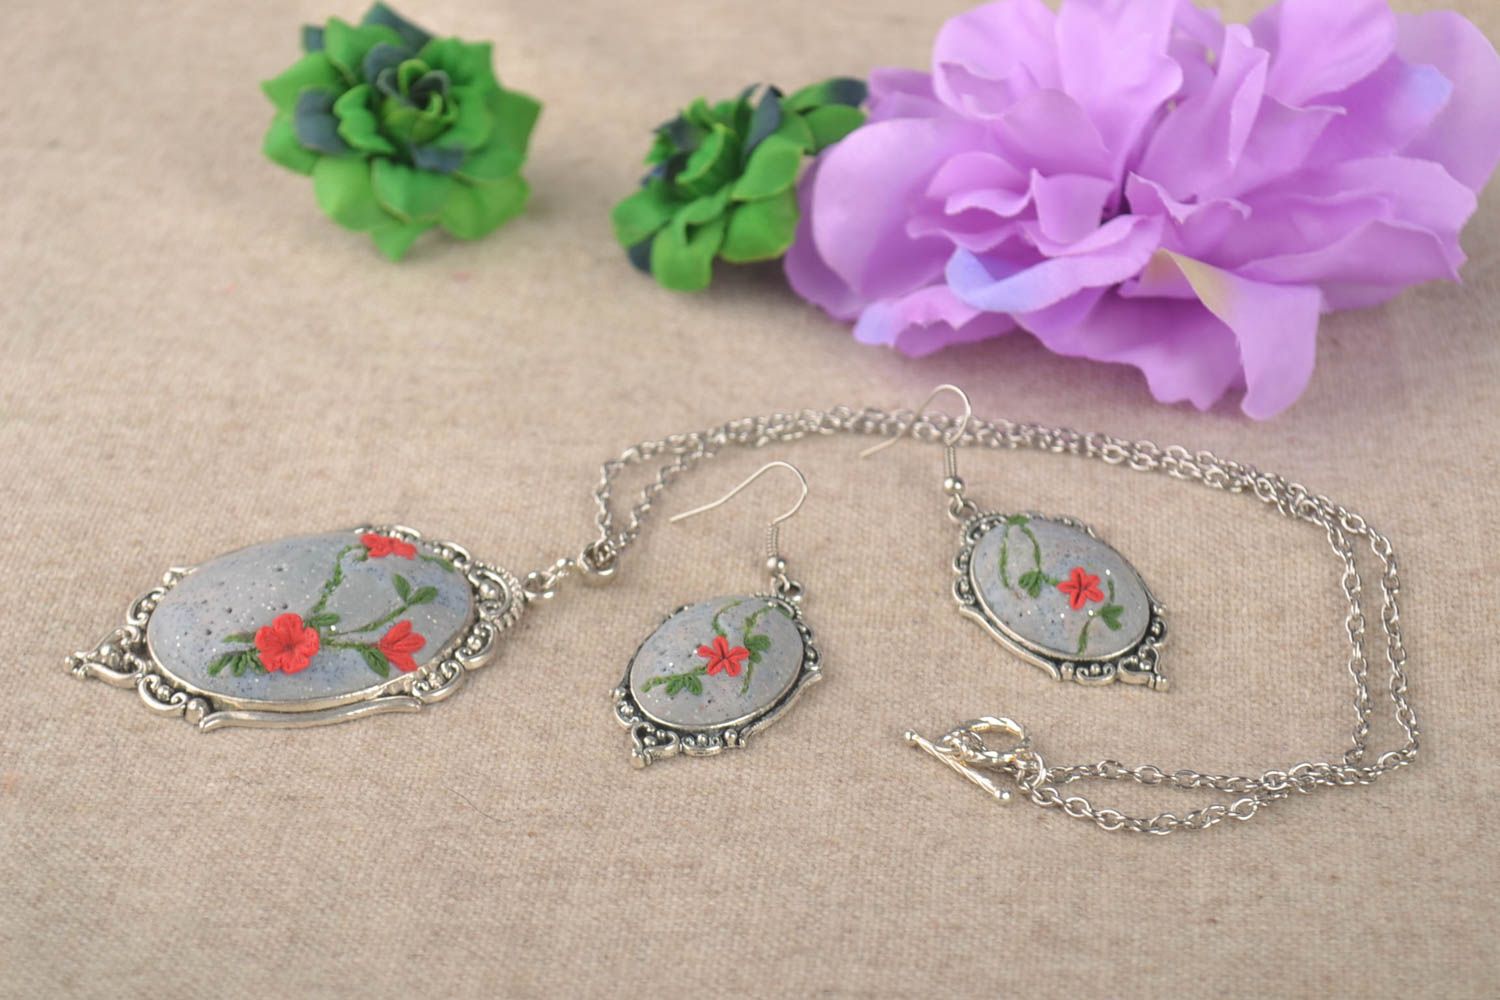 Designer handmade jewelry earrings and a necklace made of polymer clay present photo 1